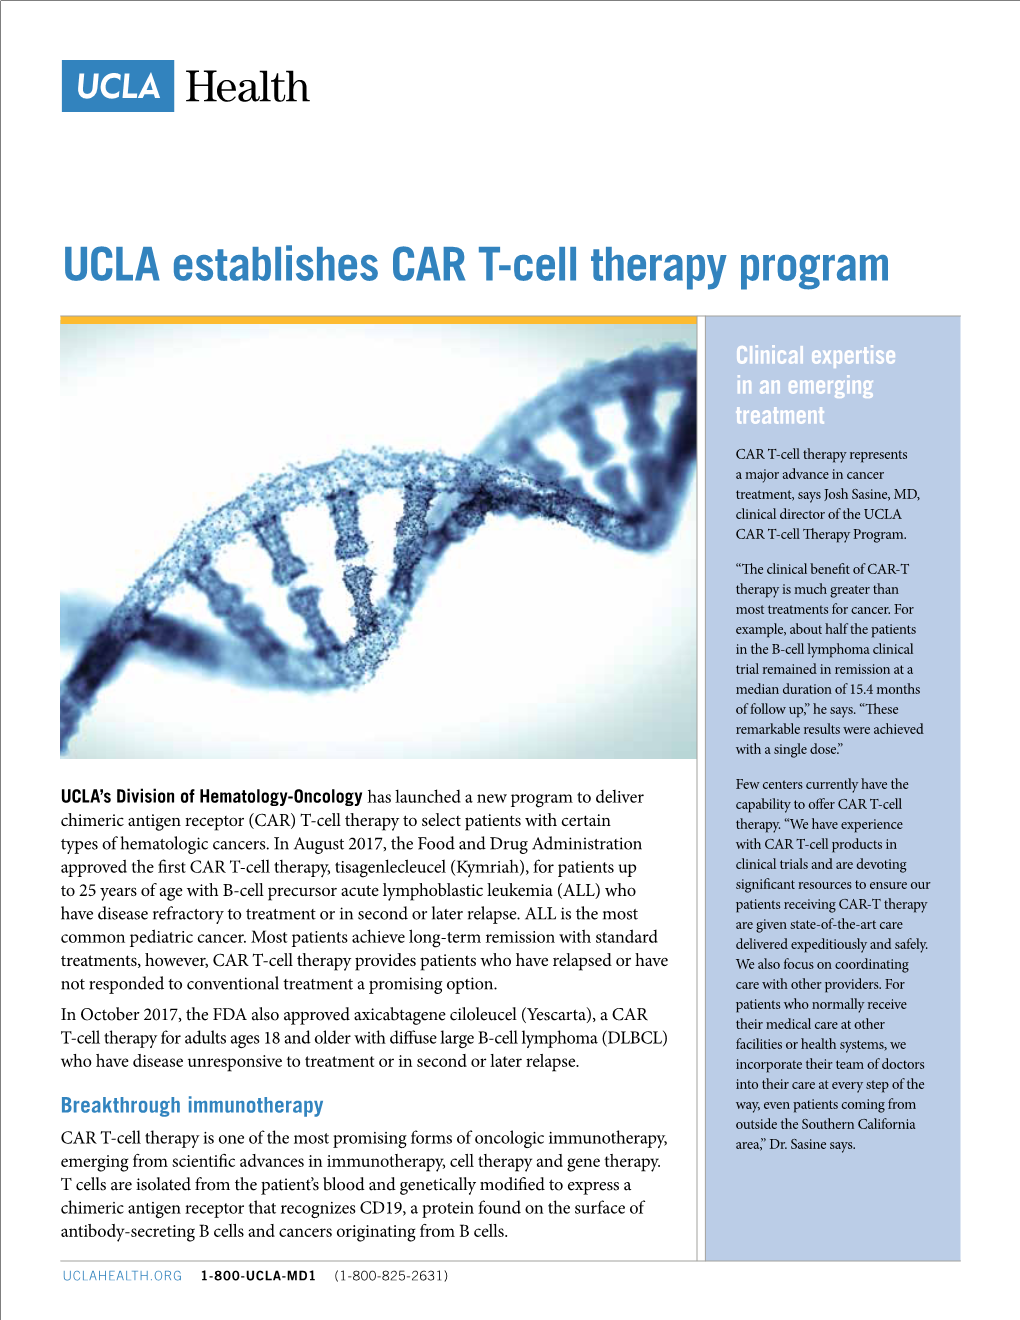 UCLA Establishes CAR T-Cell Therapy Program